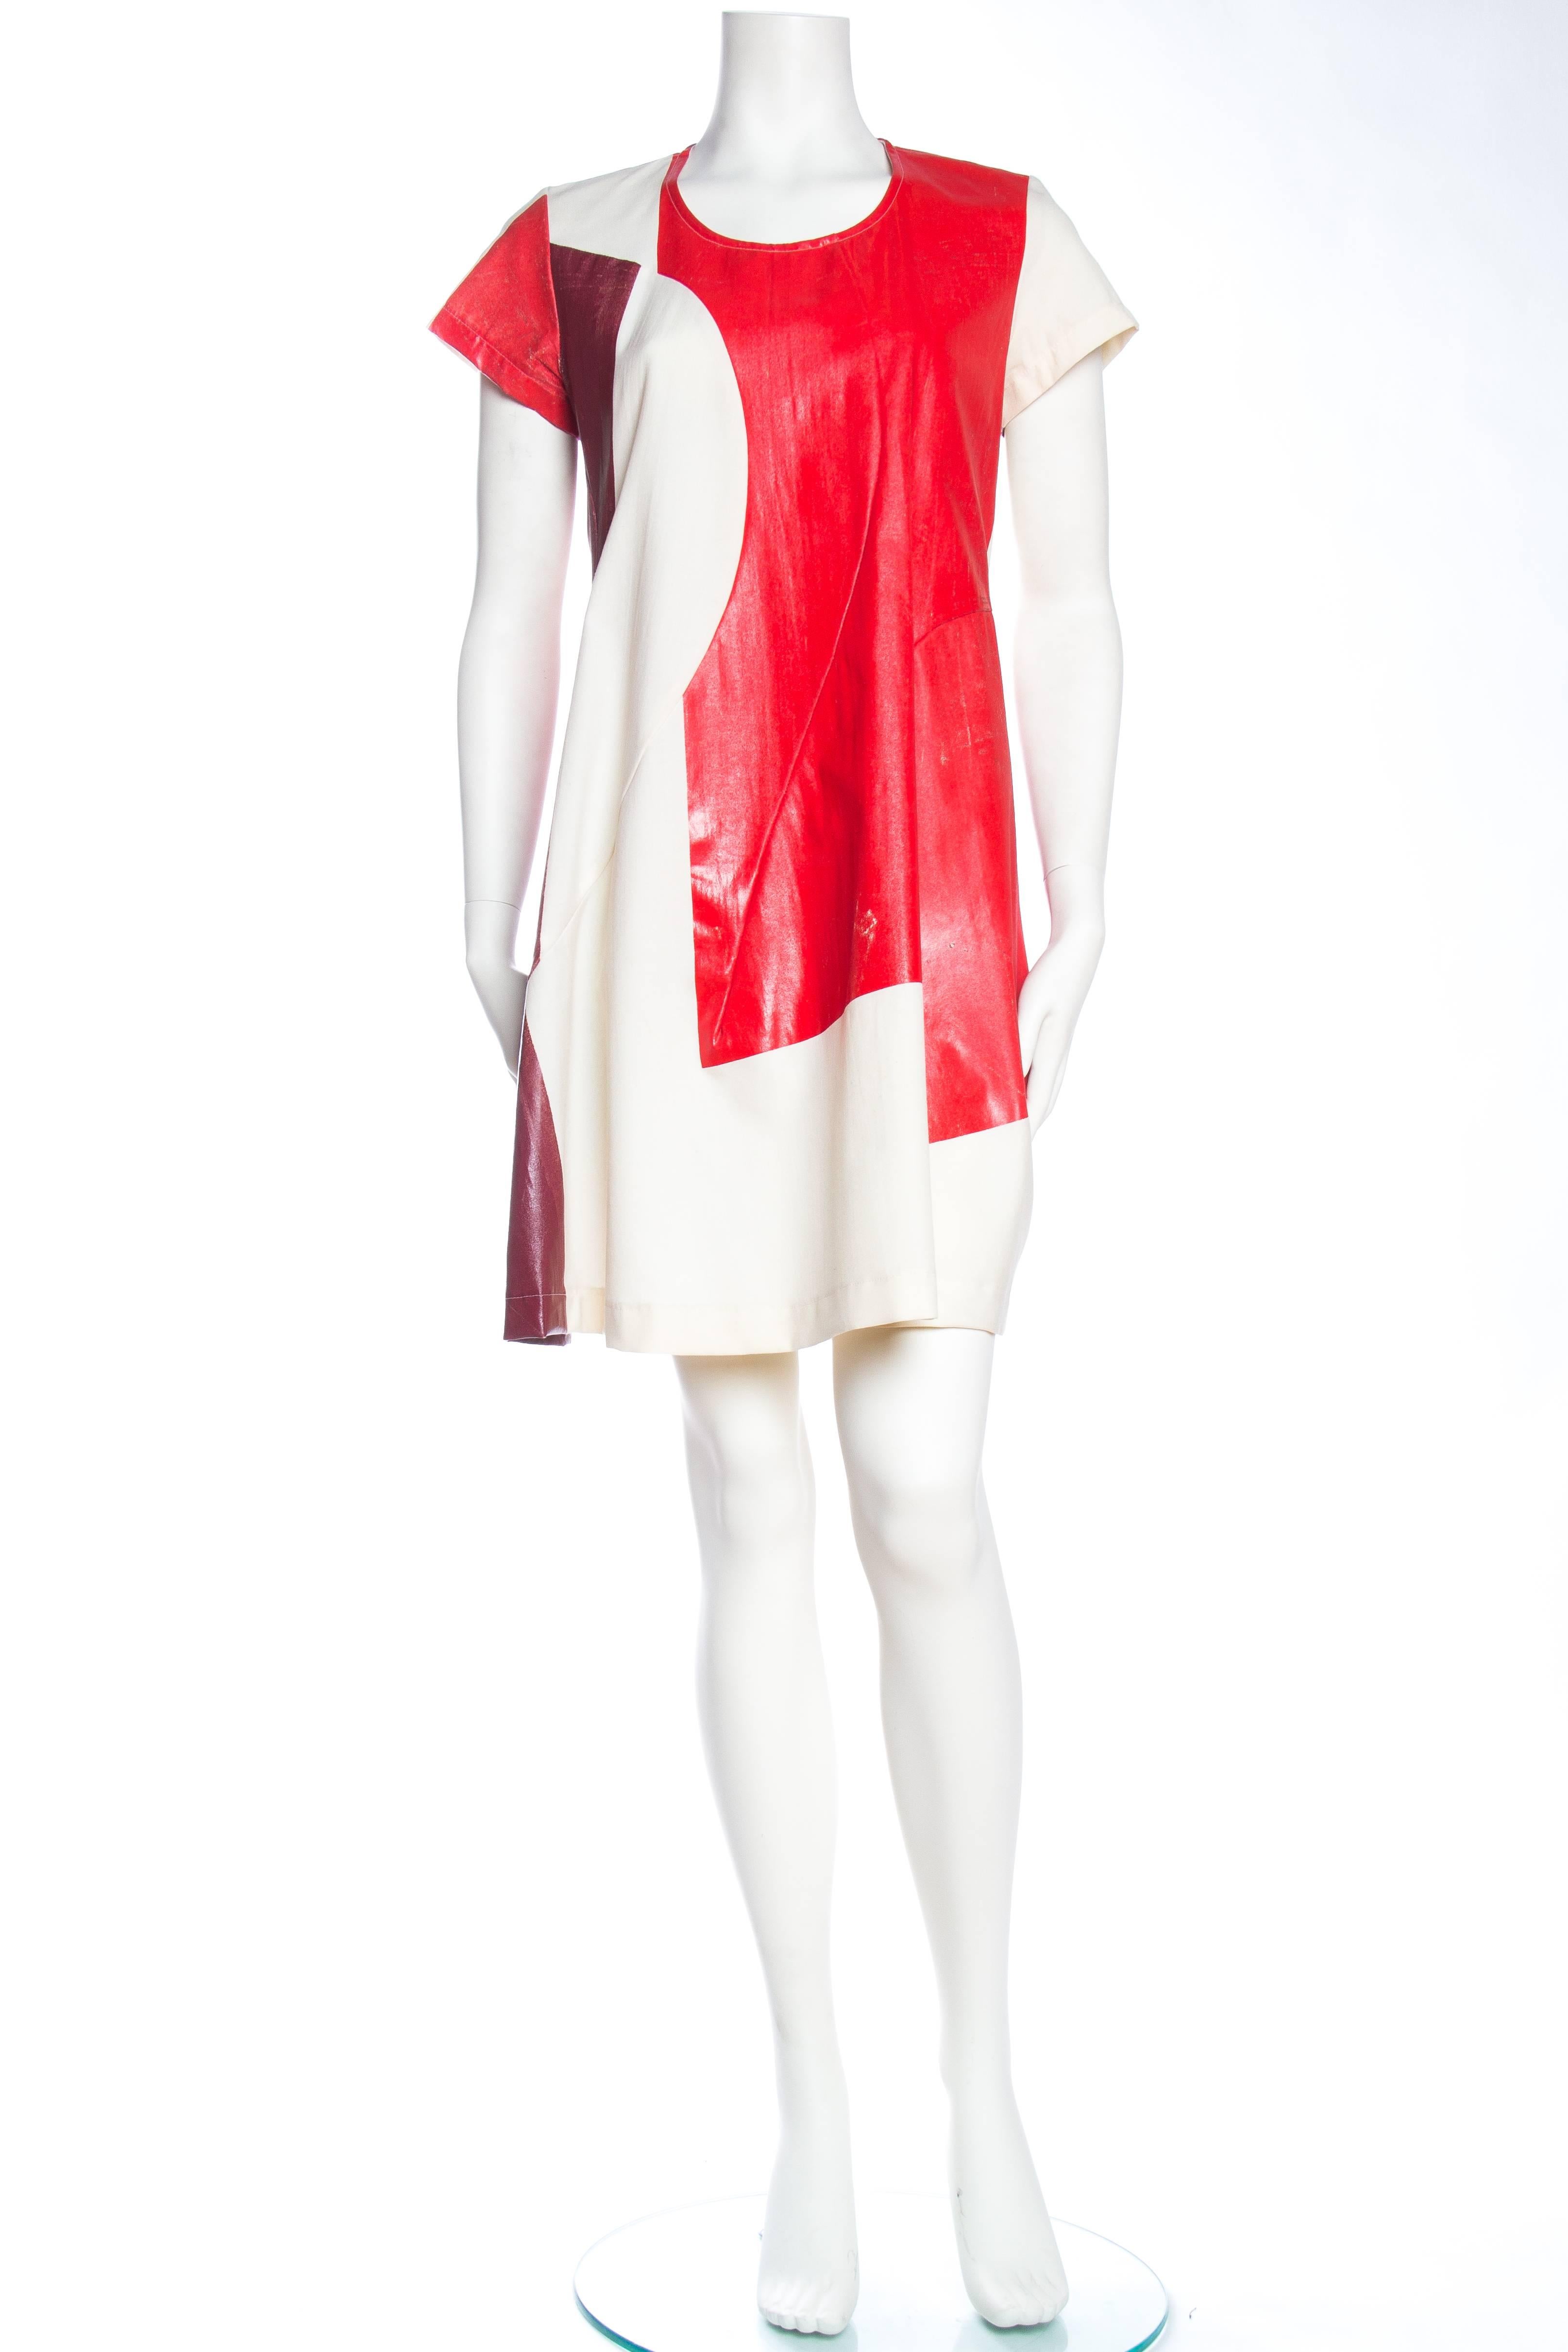 1990S COMME DES GARCONS Red & White Cotton Hand-Painted Patchwork Muslin Dress From 1995